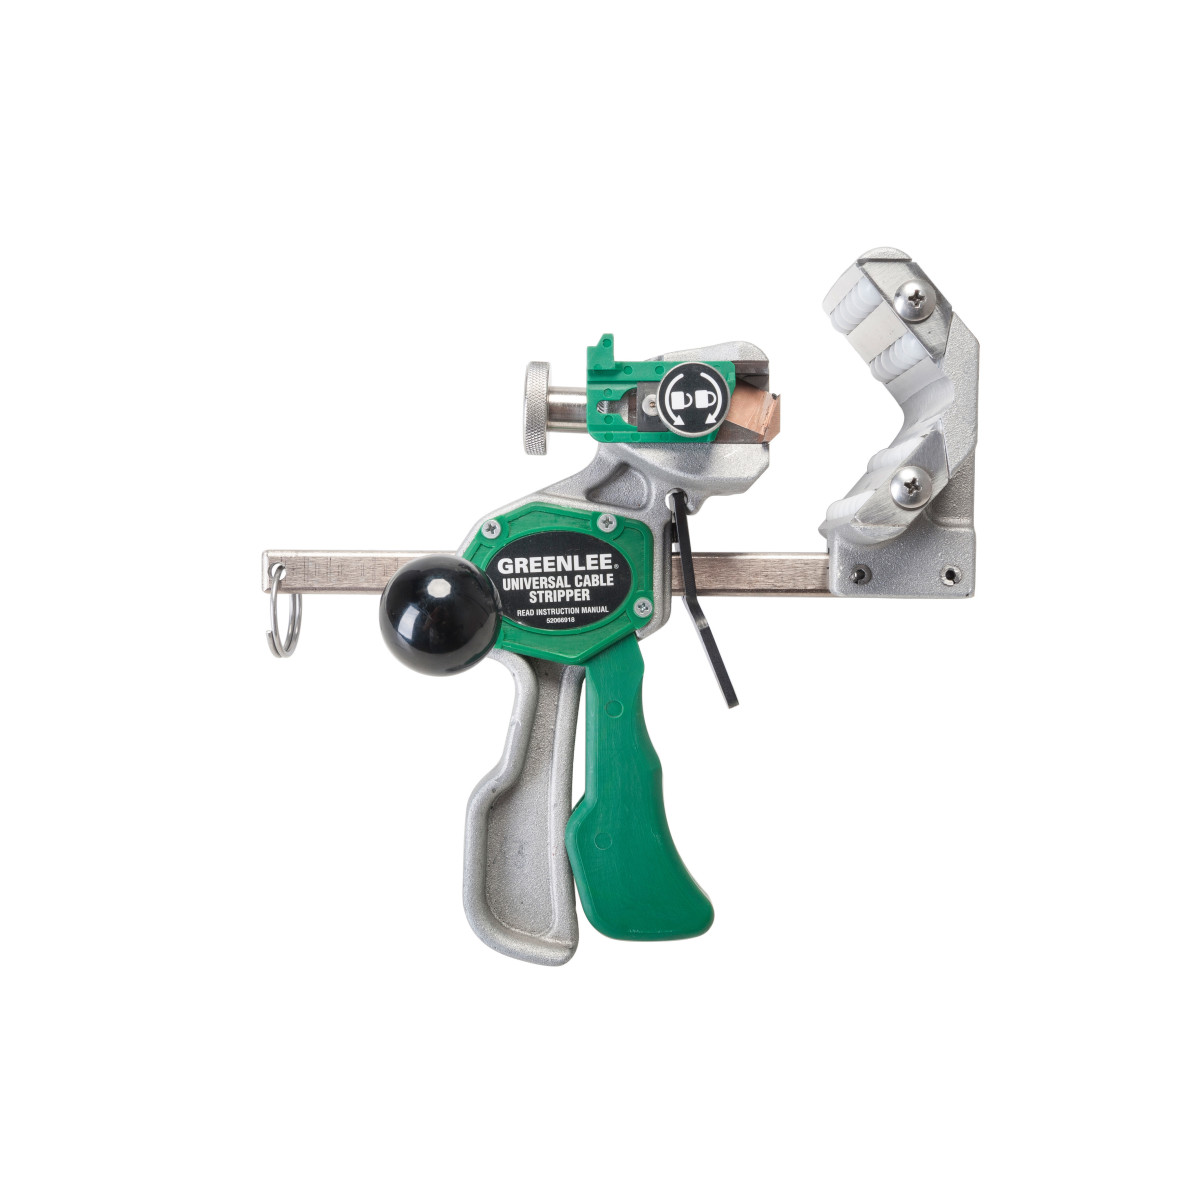 Full Universal EPR Tool Kit.  Large capacity clamp jaw, wide range 1/2" - 3" cable outside diameter, enabling  productivity when working with a variety of cable sizes.  Tension trigger, 150 lbs of clamping force allows user to securely capture cable for precise blade setting.  Delrin ball bearing rollers reduces the amount of force needed for the tool to move around and up the cable during stripping.  Roller ball actuation allows user to maintain constant contact with the clamp as it move around the cable.  Precision adjustable cutting blades EPR and XLPE design specific blades allow for ease and efficient cut back.